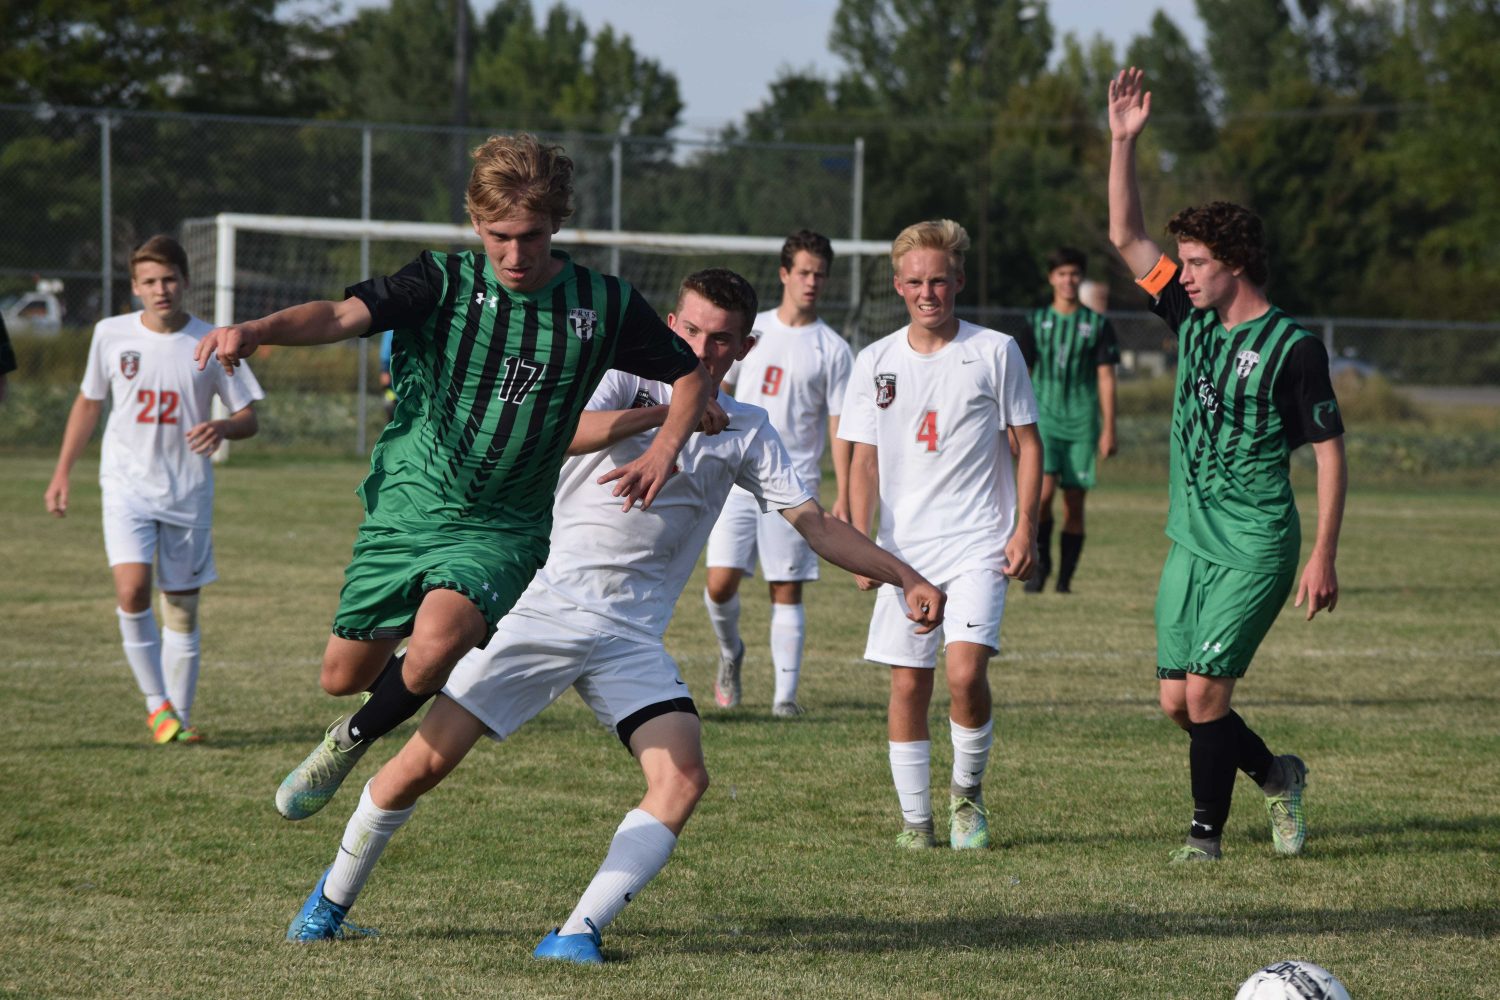 Soccer still undefeated as they play closer to home